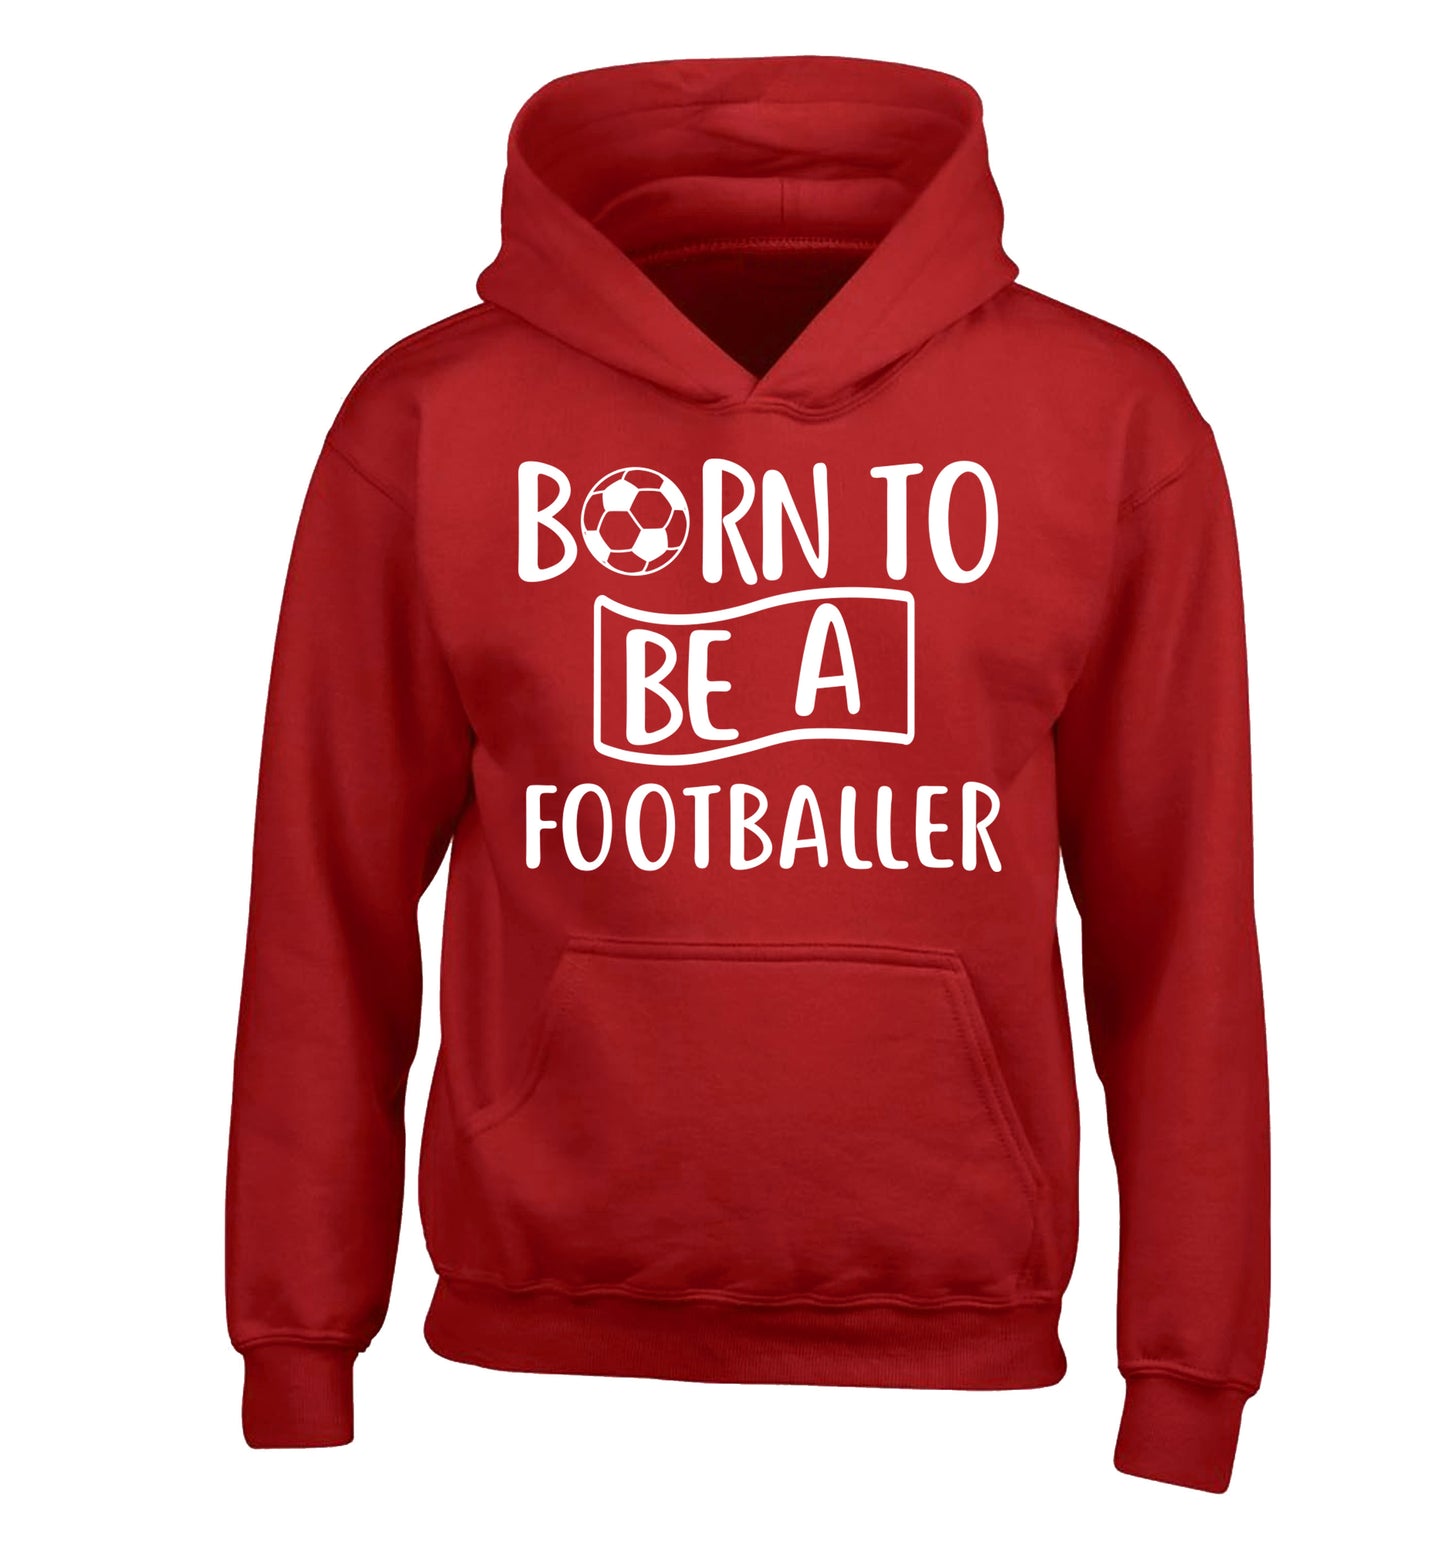 Born to be a footballer children's red hoodie 12-14 Years